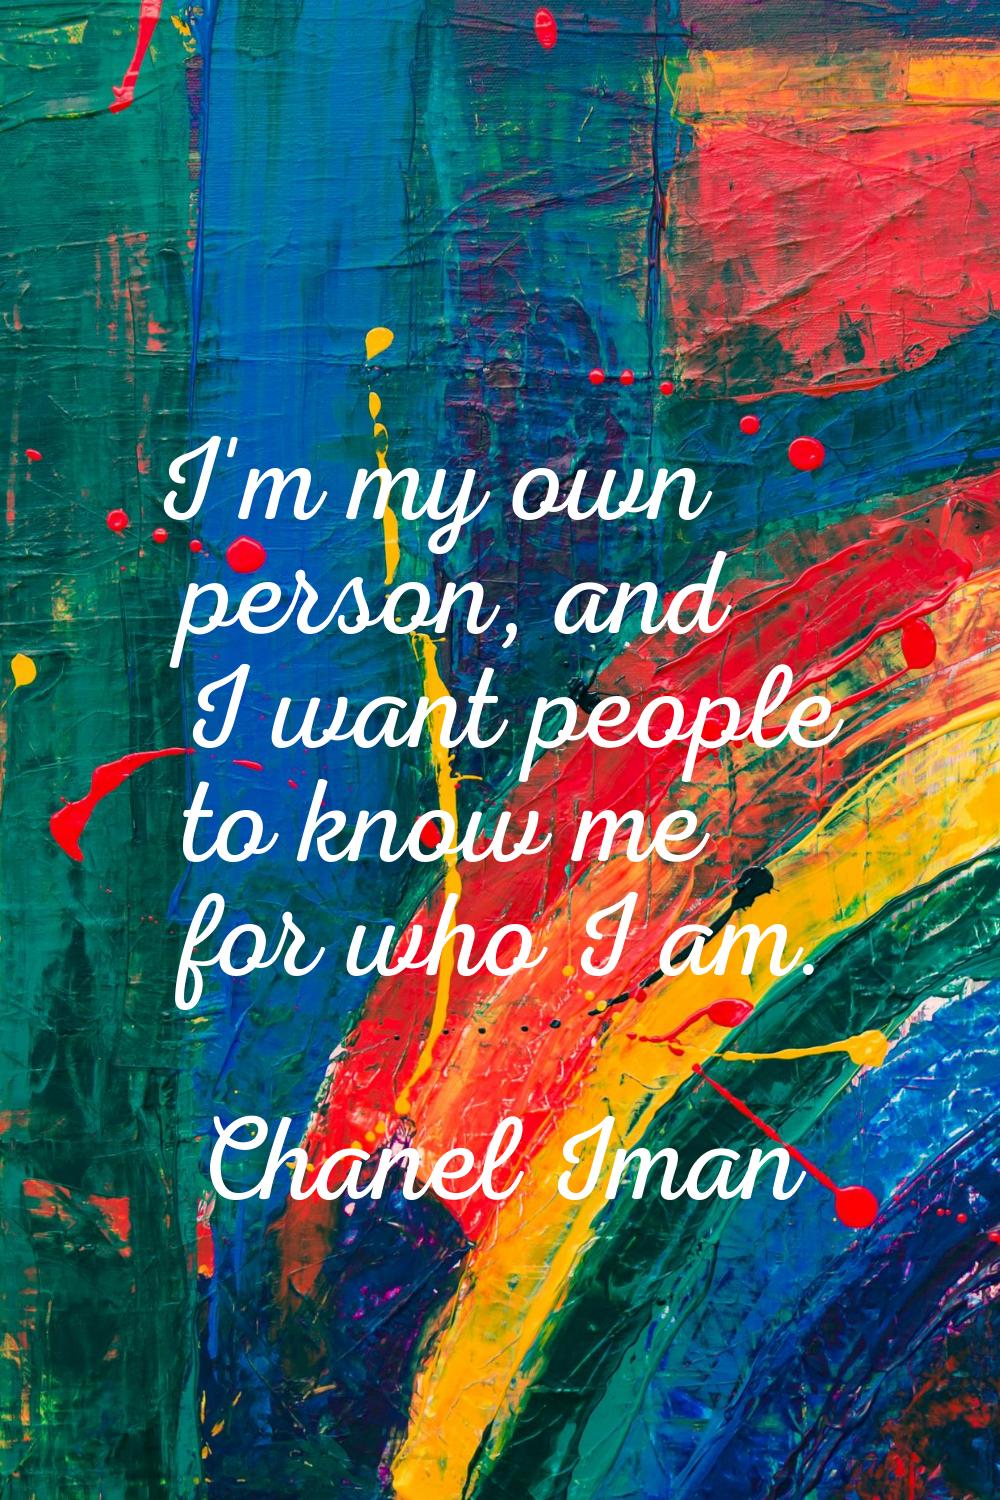 I'm my own person, and I want people to know me for who I am.